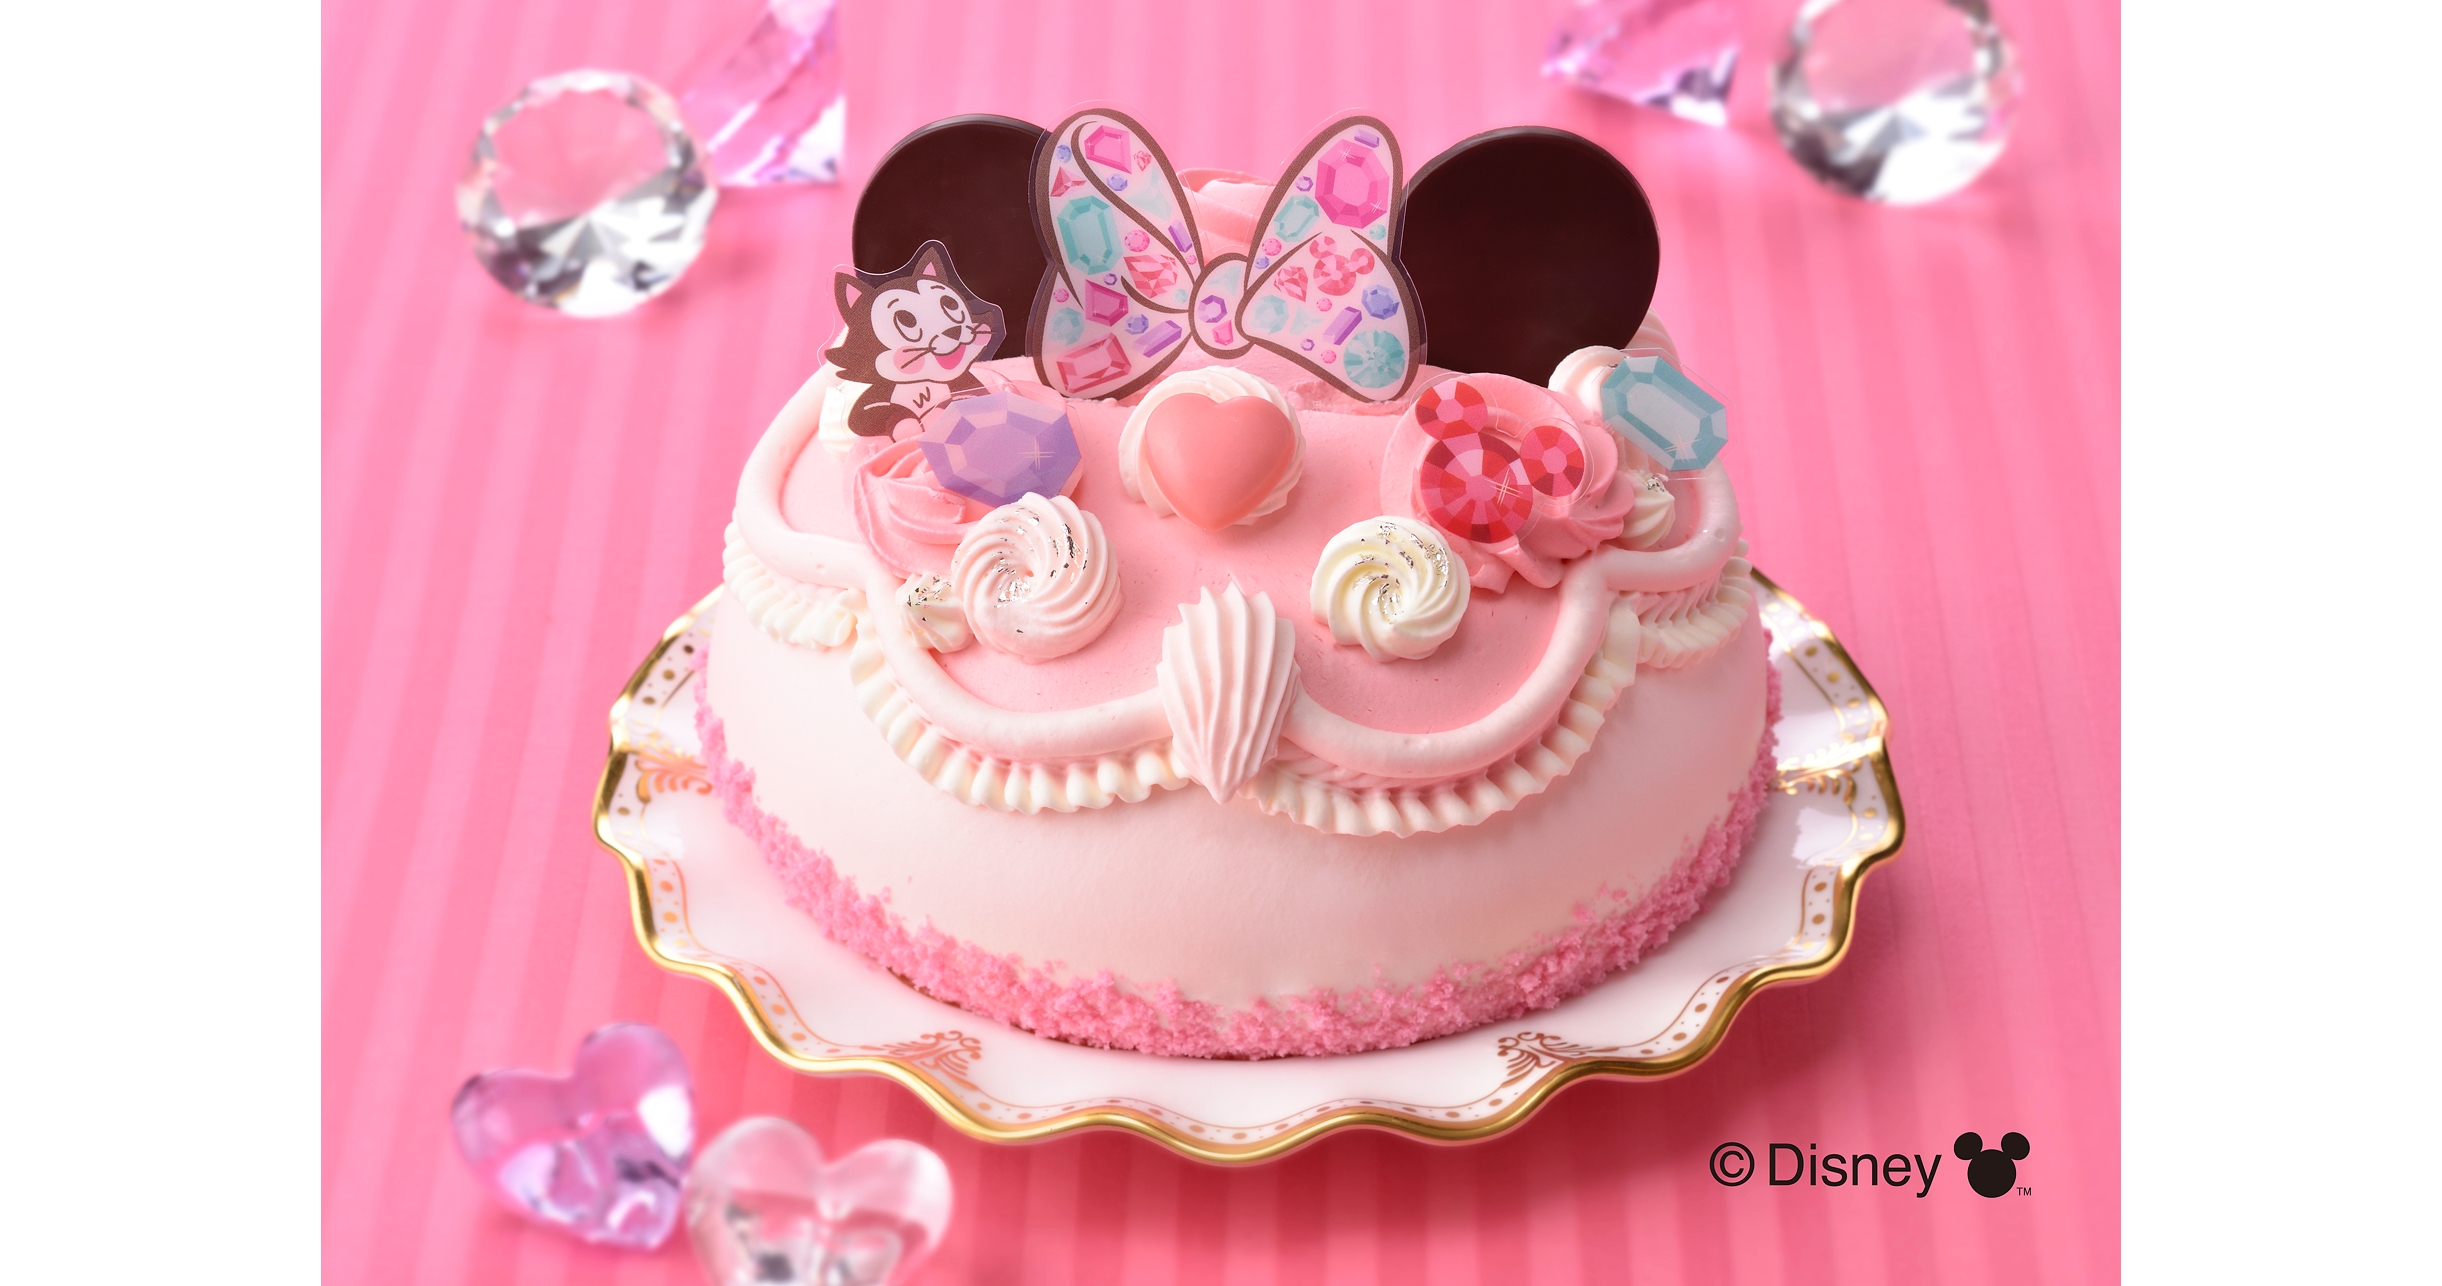 Smash that cake Minnie mouse design for first Birthday 🎂 #cake #smashcake  #smashcakesession #cakedesign #minniemouse #disney #minnie… | Instagram